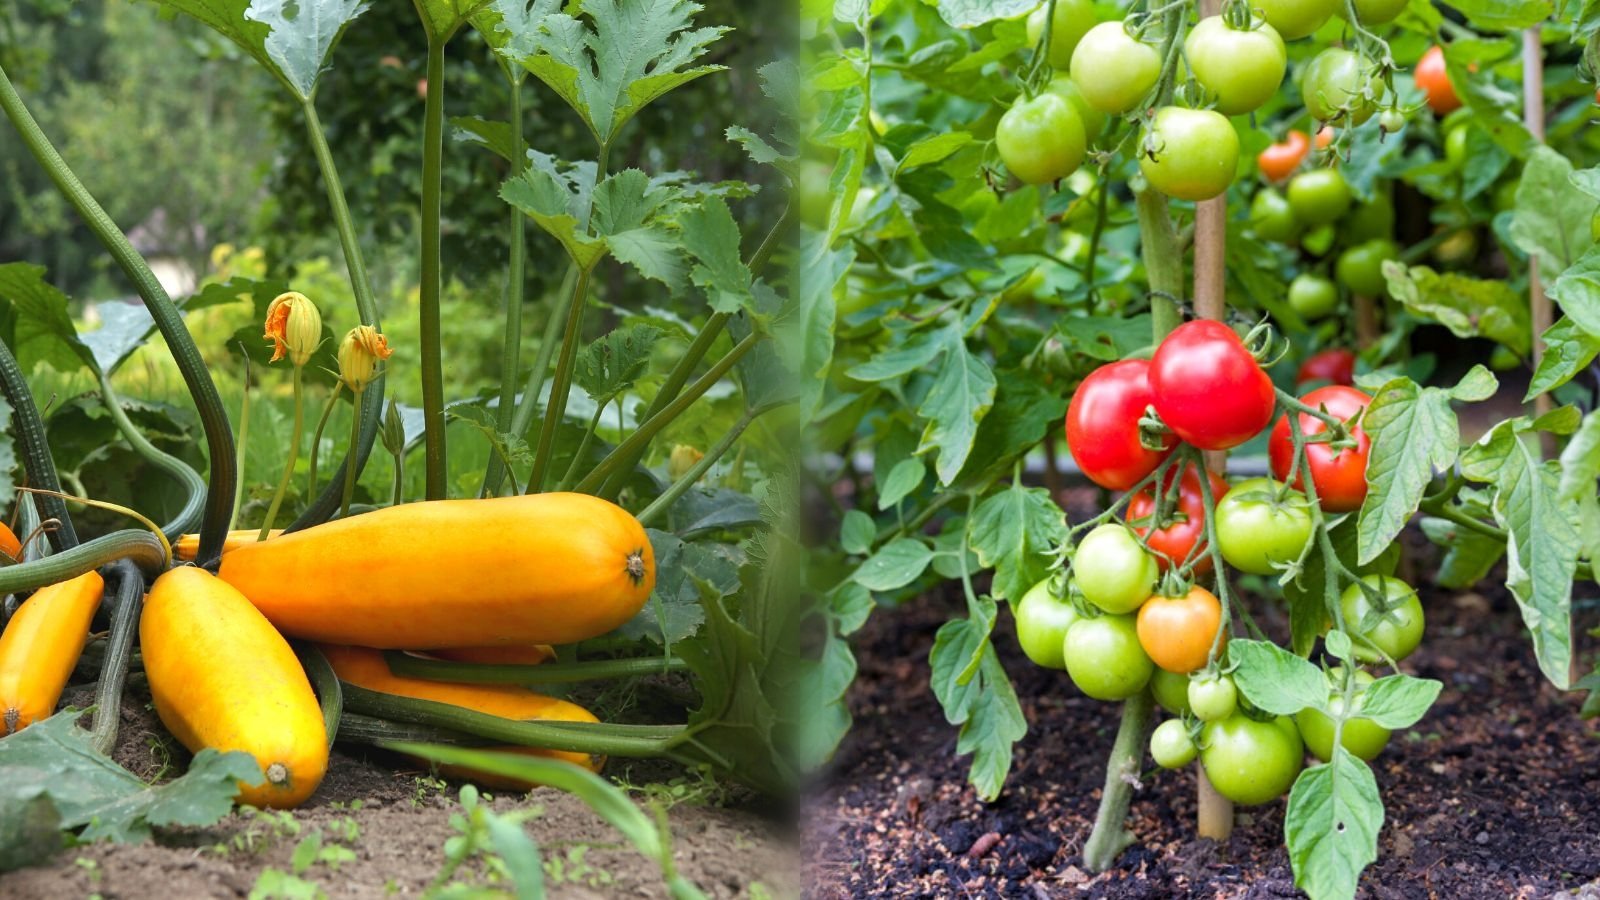 Can You Grow Tomatoes With Squash in Your Garden?